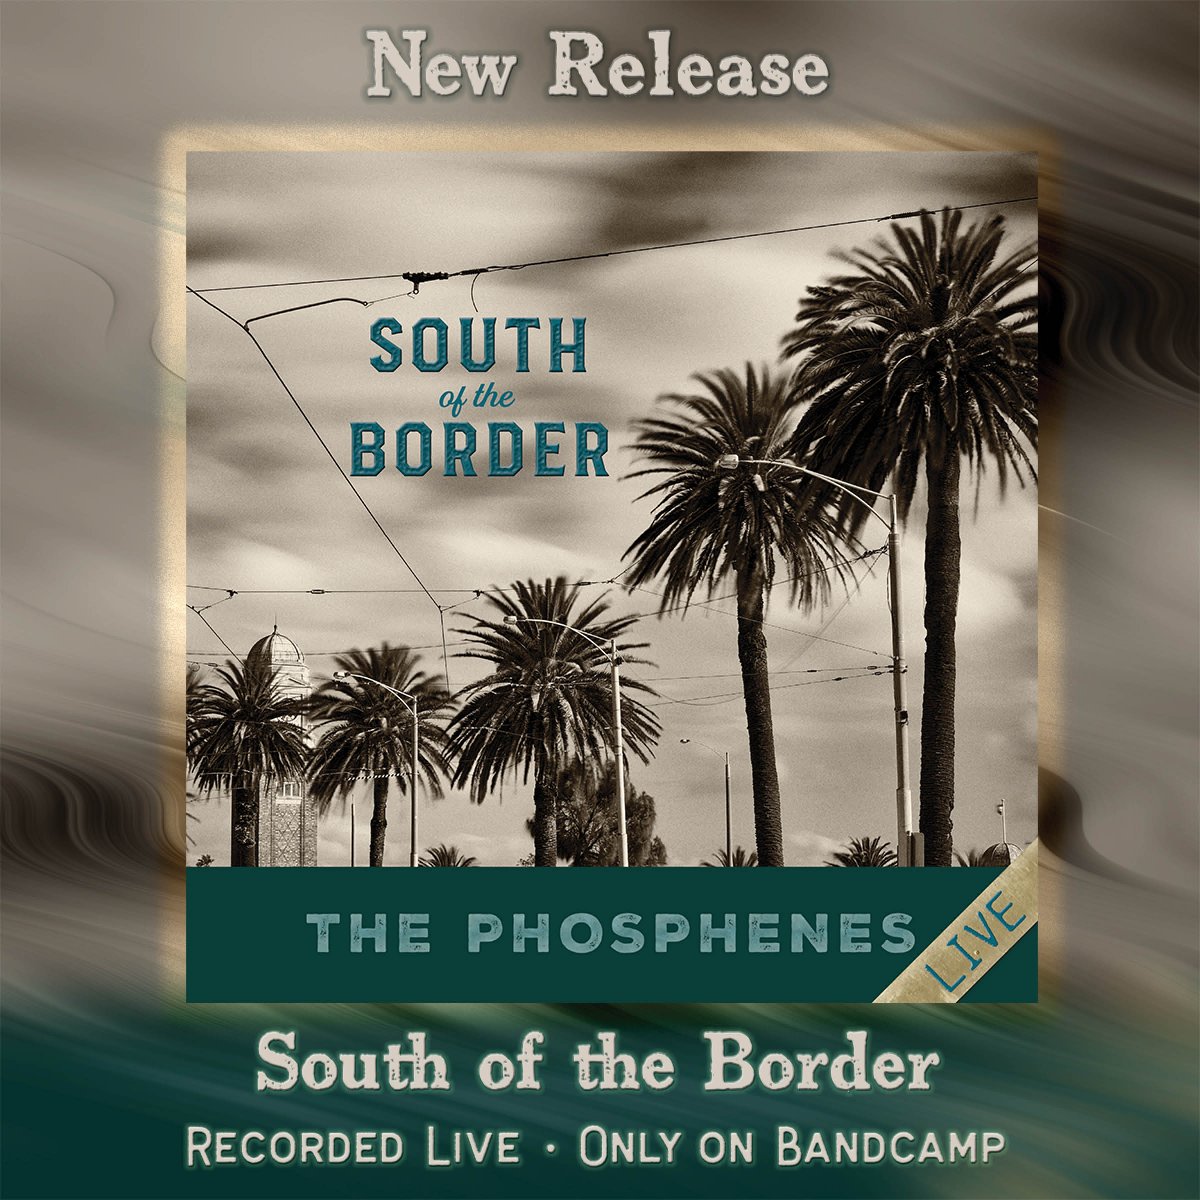 Our latest release “South of the Border” includes two new songs!
shiny.link/YsTq3G
#newalbum #livealbum #newrelease #outnow #aussiemusic #lockdownmusic #indie #indierock #newsongalert #listennow #bandcamp #bandcampmusic #melbournemusos #melbournemusic #madeinmelbourne